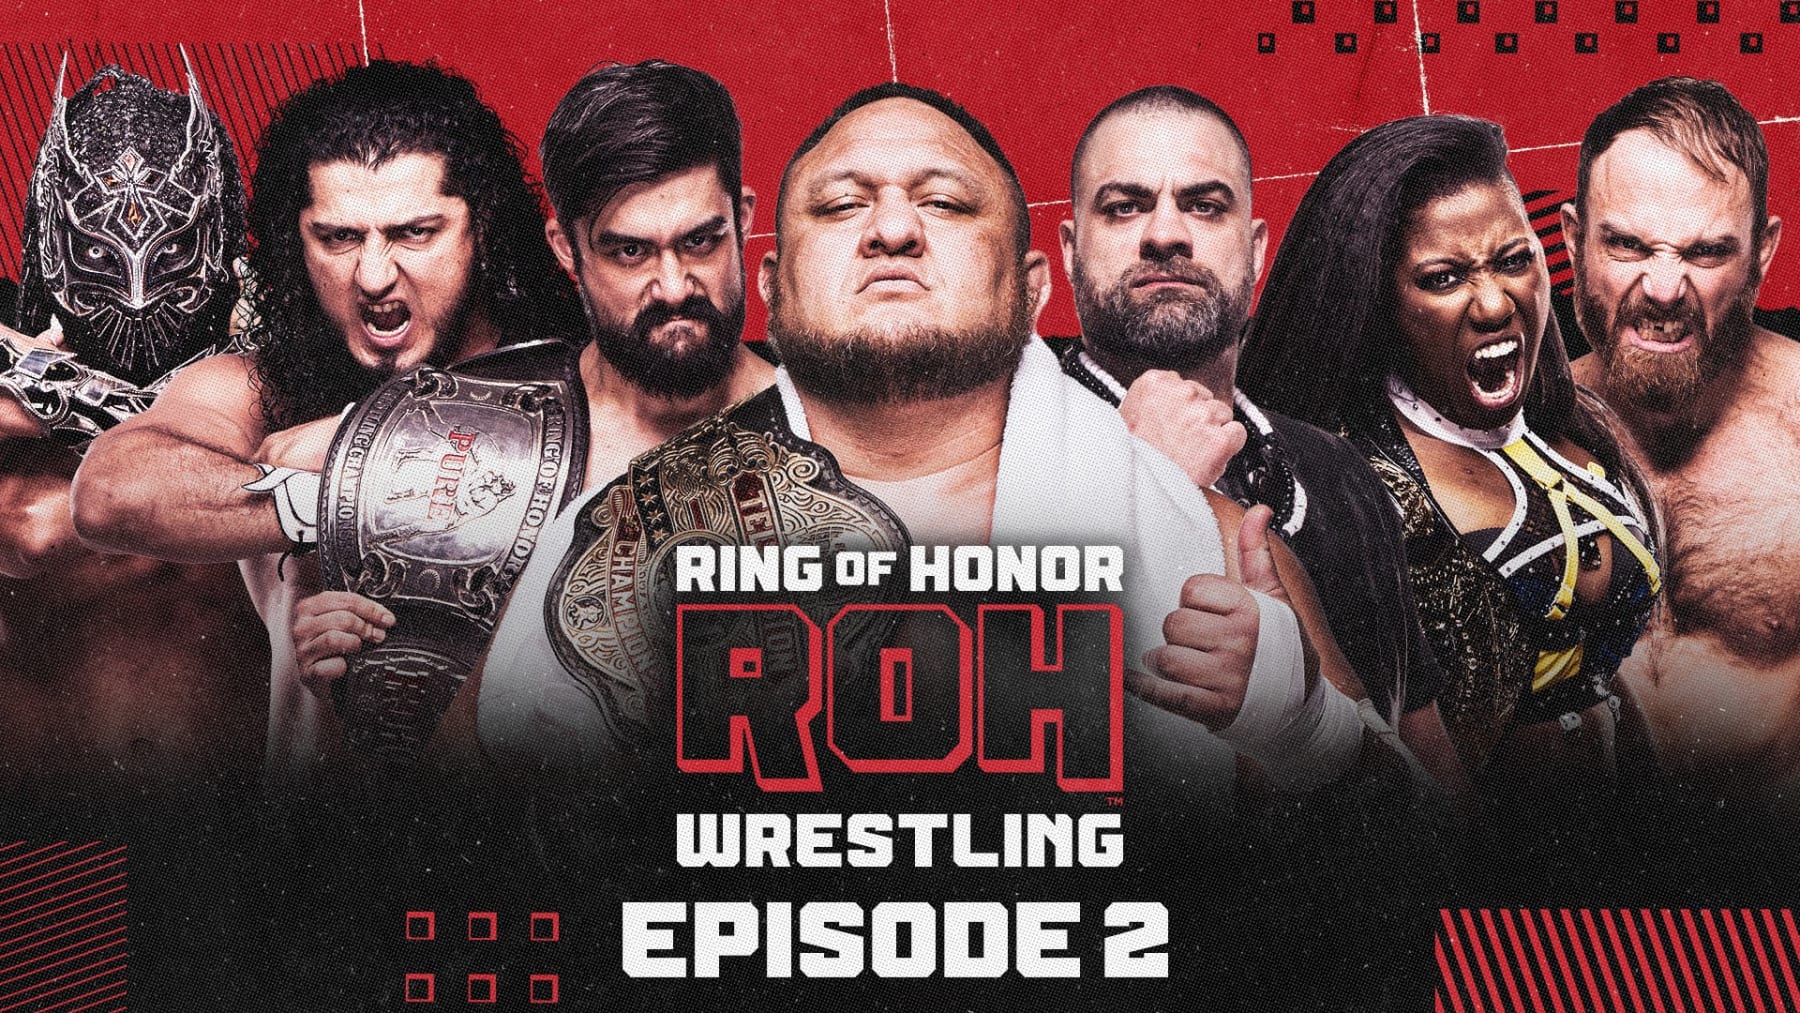 Tony Khan will address vacant TV title on next week's Ring of Honor -  WON/F4W - WWE news, Pro Wrestling News, WWE Results, AEW News, AEW results